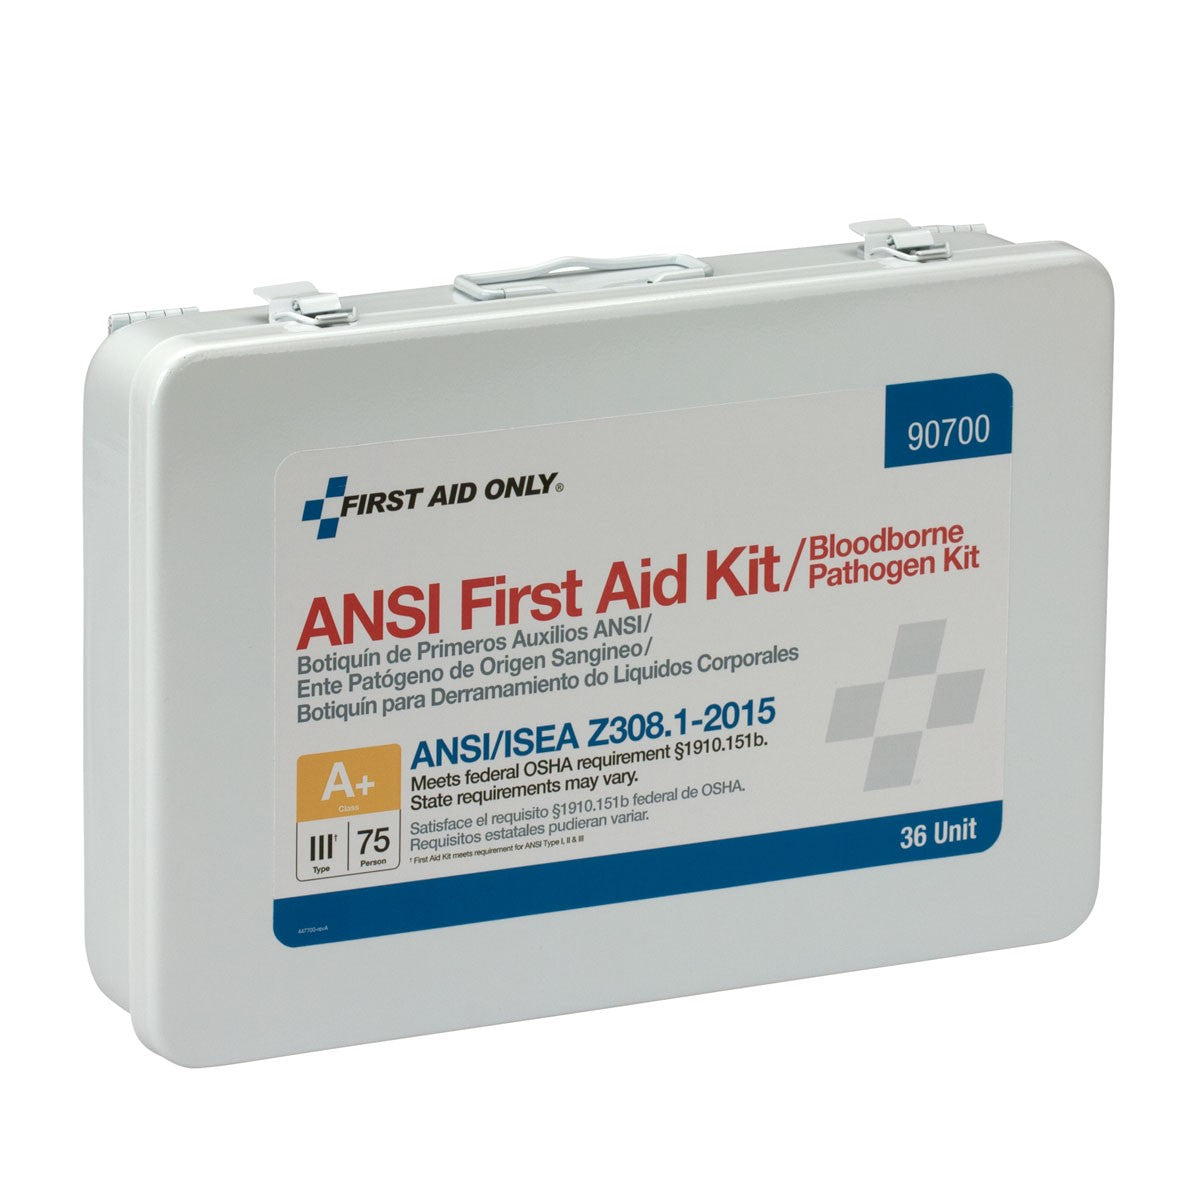 75 Person 36 Unit First Aid Kit, ANSI A+ Compliant With BBP (Blood Borne Pathogen) Pack, Weatherproof Steel Case, Type III - BS-FAK-90700-1-FM